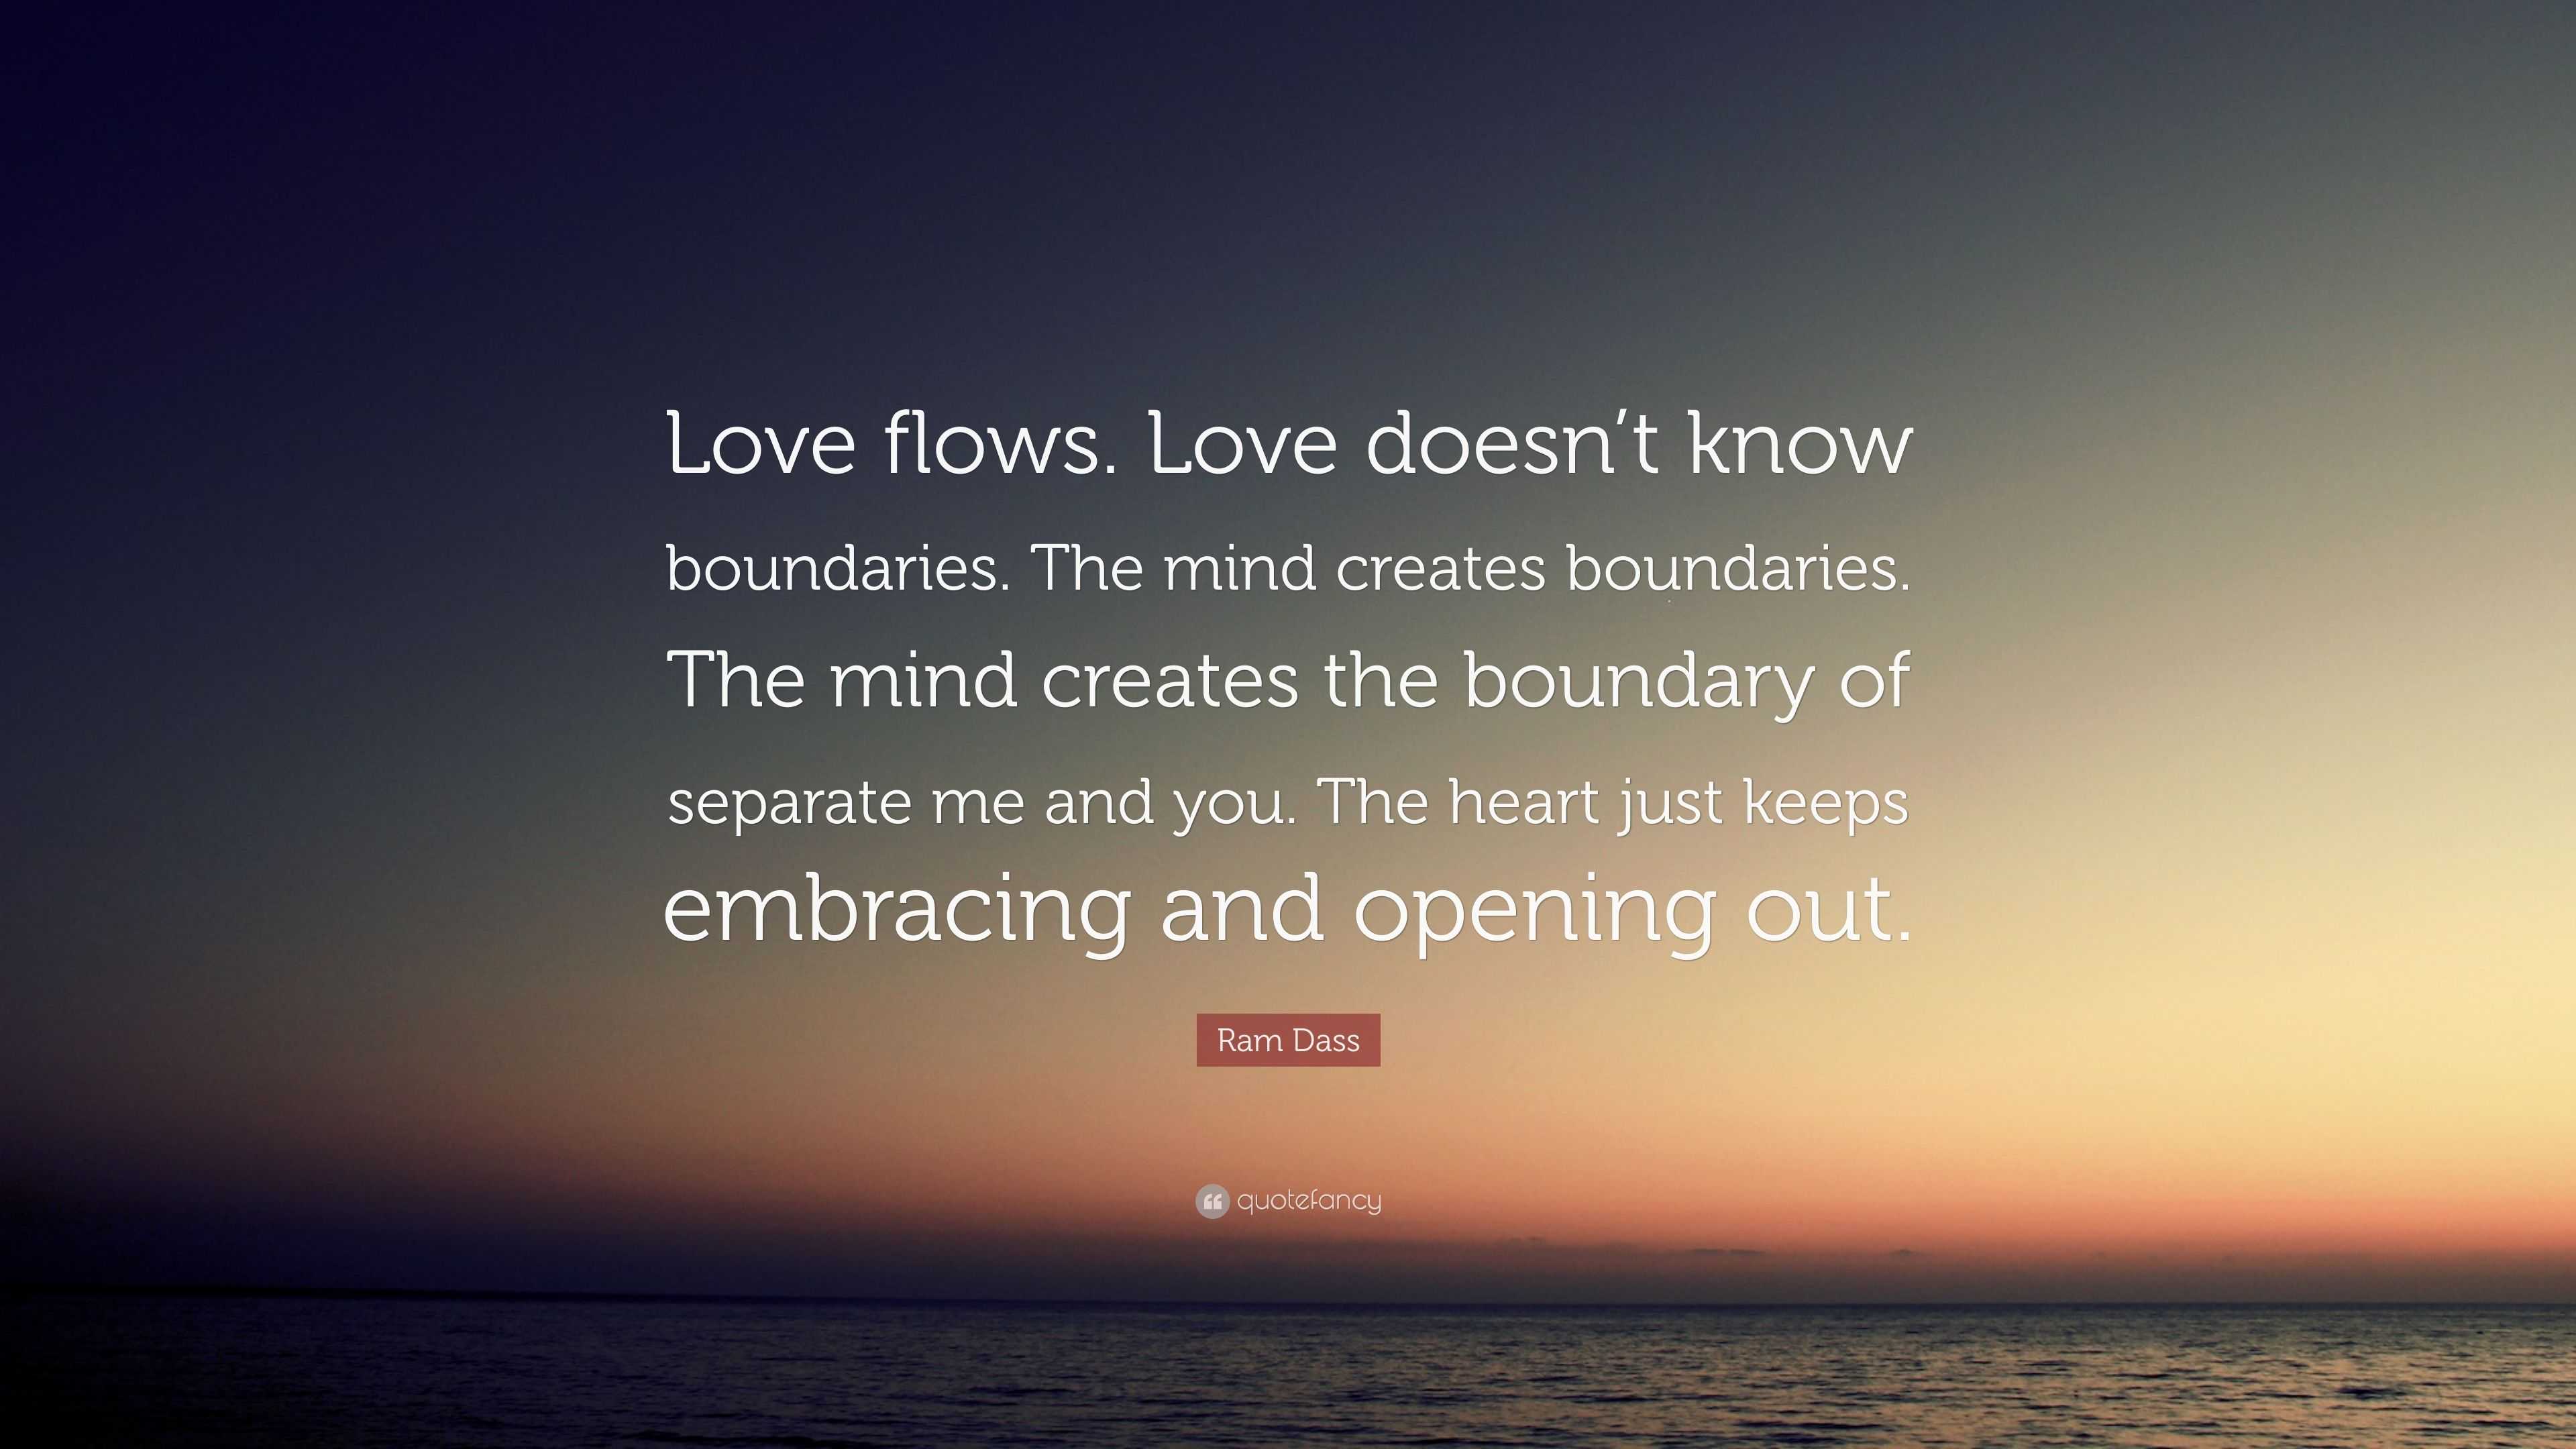 Ram Dass Quote: “Love flows. Love doesn’t know boundaries. The mind ...